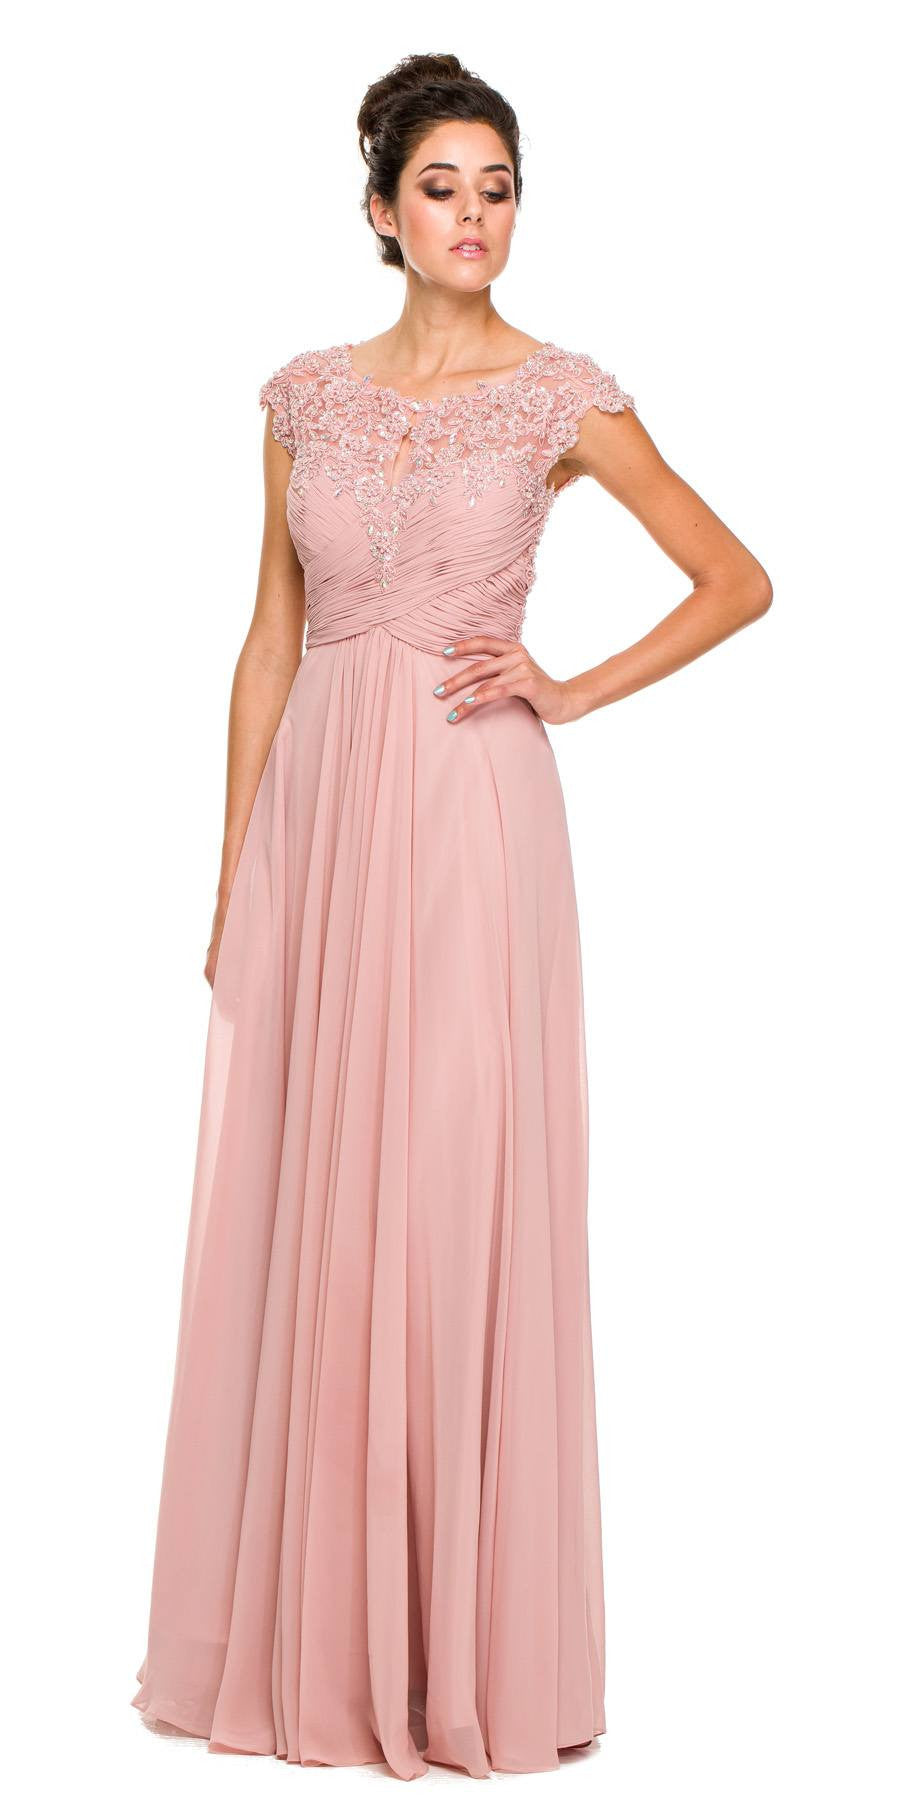 Plus Size Dusty Rose Formal Gown Cap Sleeve Empire Waist Full Length